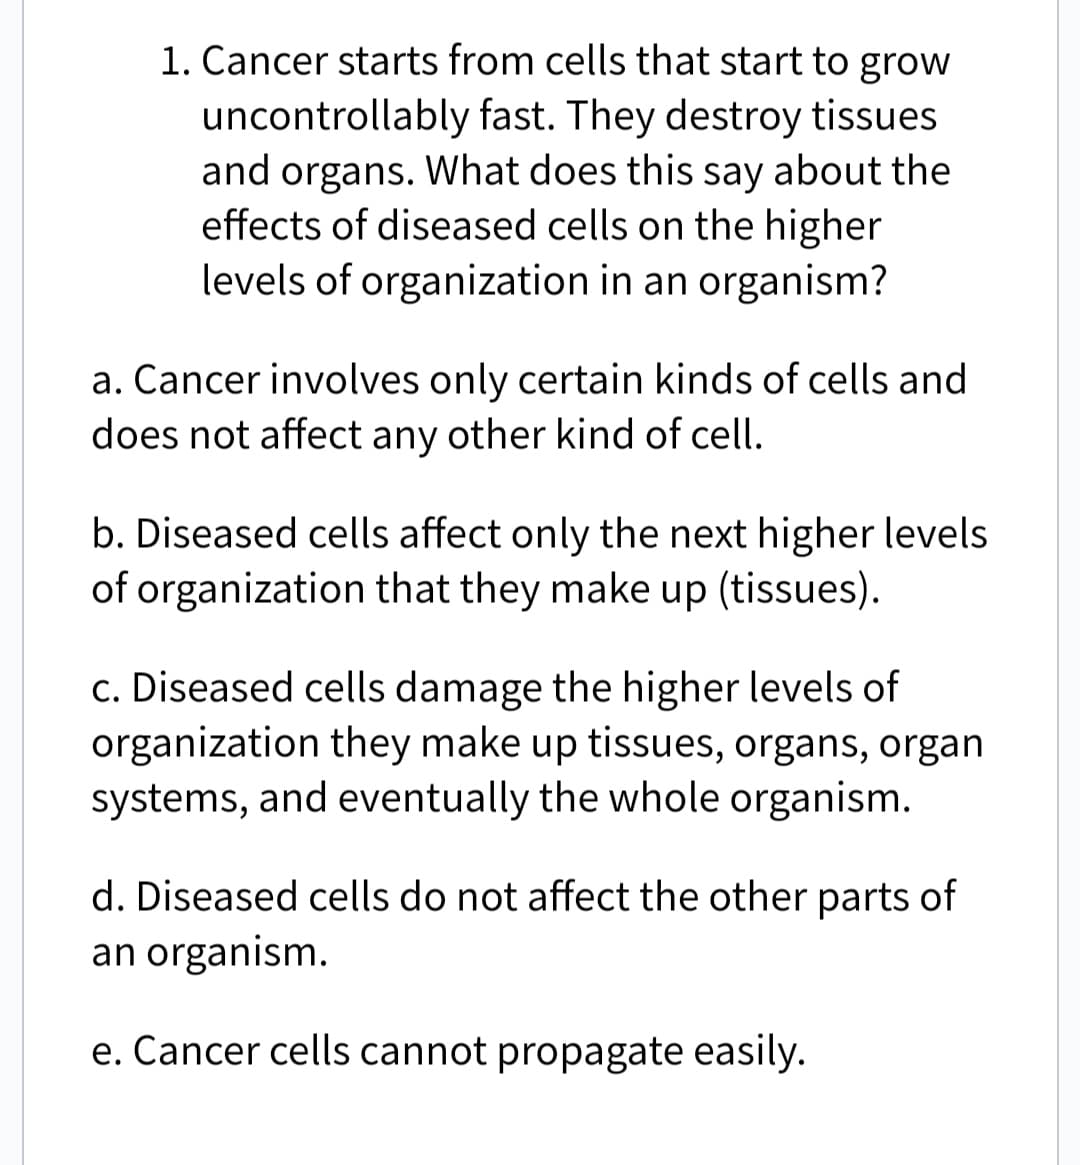 1. Cancer starts from cells that start to grow
uncontrollably fast. They destroy tissues
and organs. What does this say about the
effects of diseased cells on the higher
levels of organization in an organism?
a. Cancer involves only certain kinds of cells and
does not affect any other kind of cell.
b. Diseased cells affect only the next higher levels
of organization that they make up (tissues).
c. Diseased cells damage the higher levels of
organization they make up tissues, organs, organ
systems, and eventually the whole organism.
d. Diseased cells do not affect the other parts of
an organism.
e. Cancer cells cannot propagate easily.
